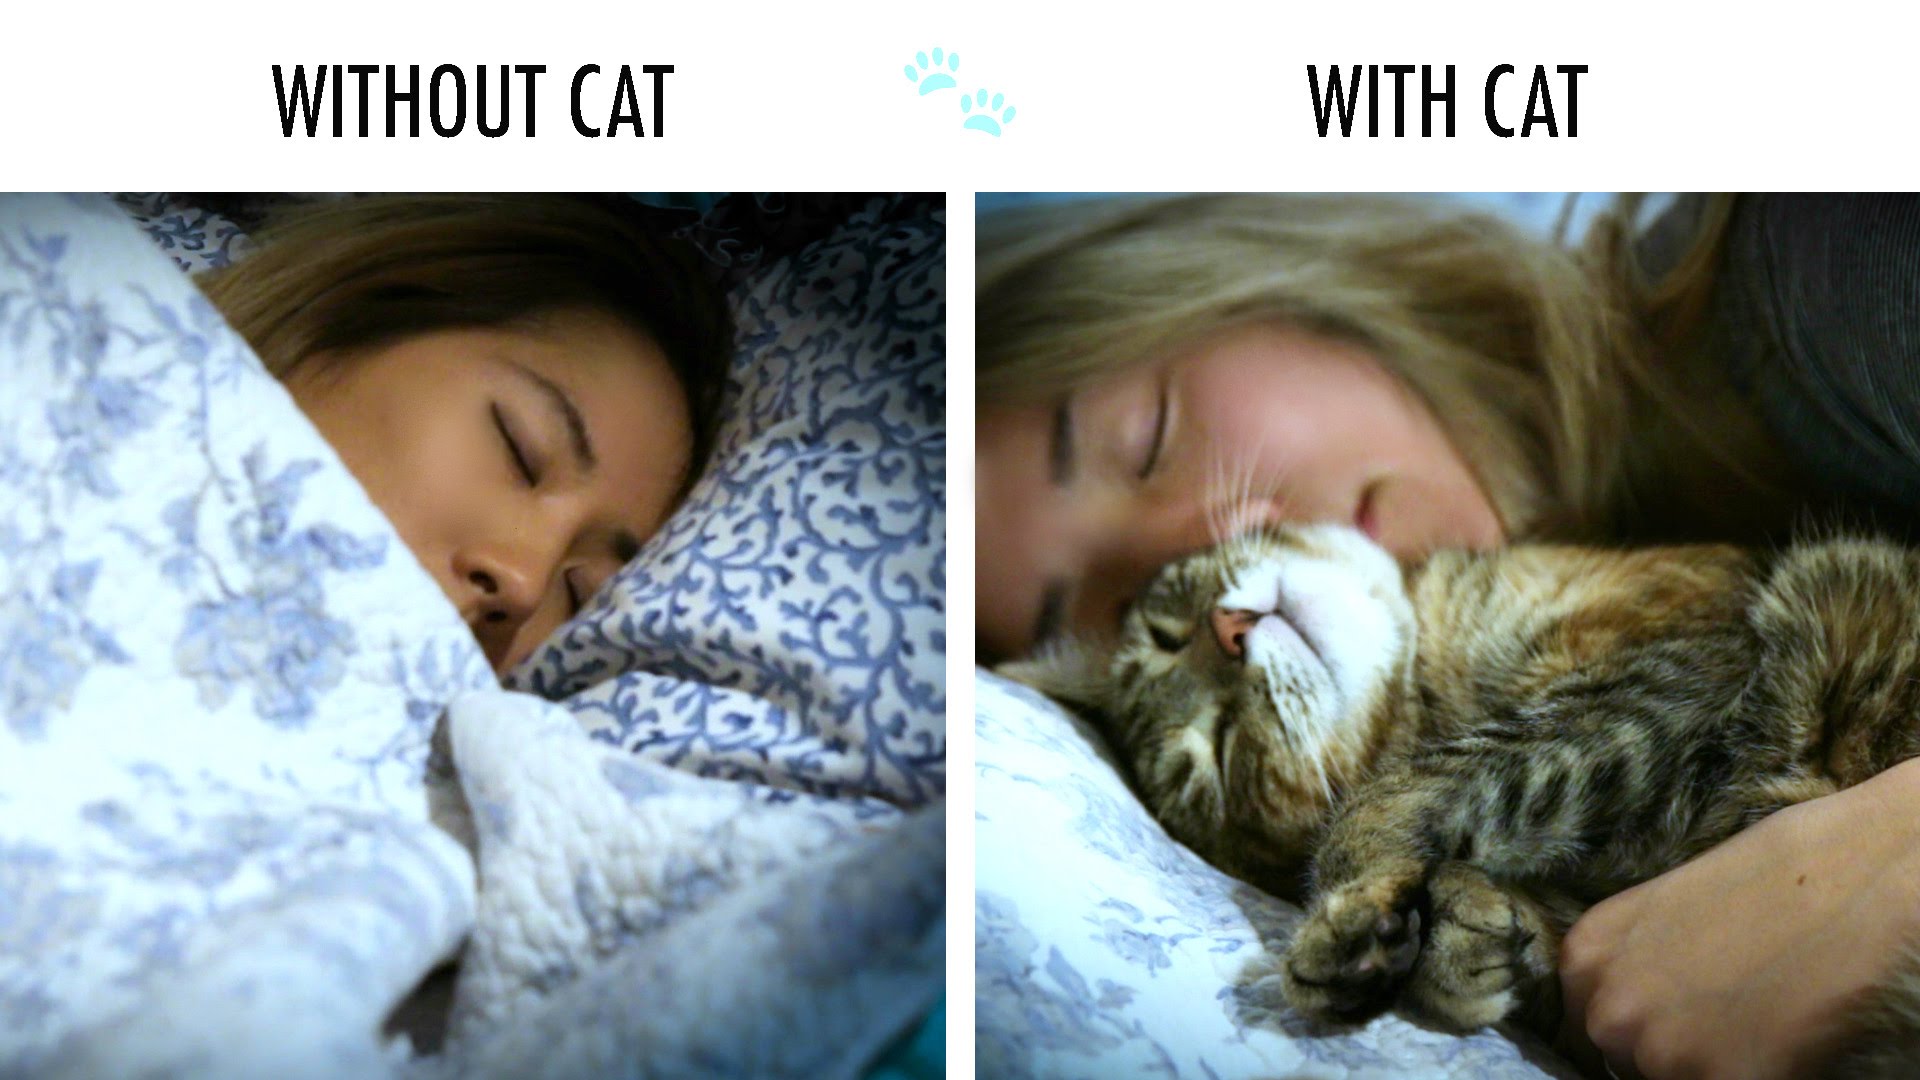 Life without and with a cat